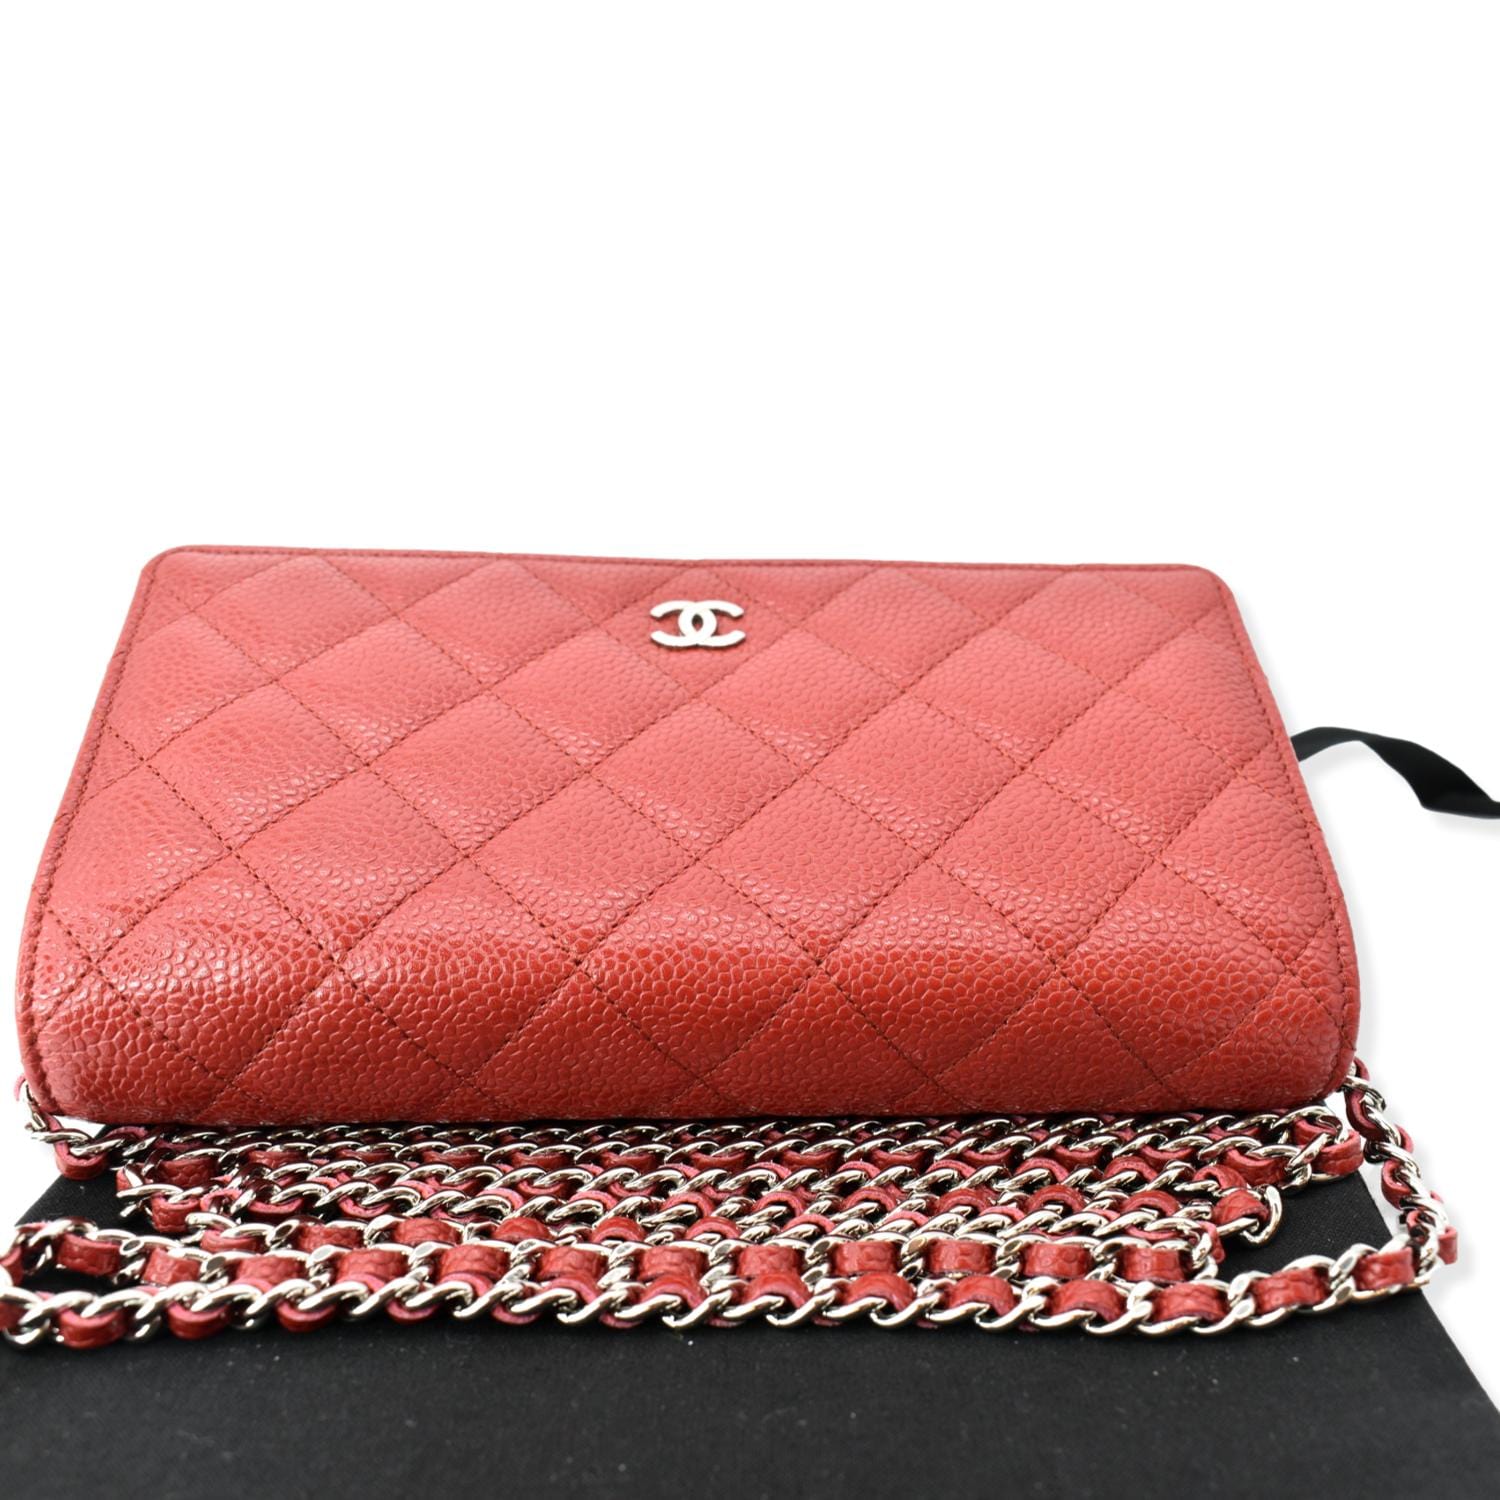 The Wallet On Chain (WOC) Bag: Chanel vs. Gucci — Fairly Curated